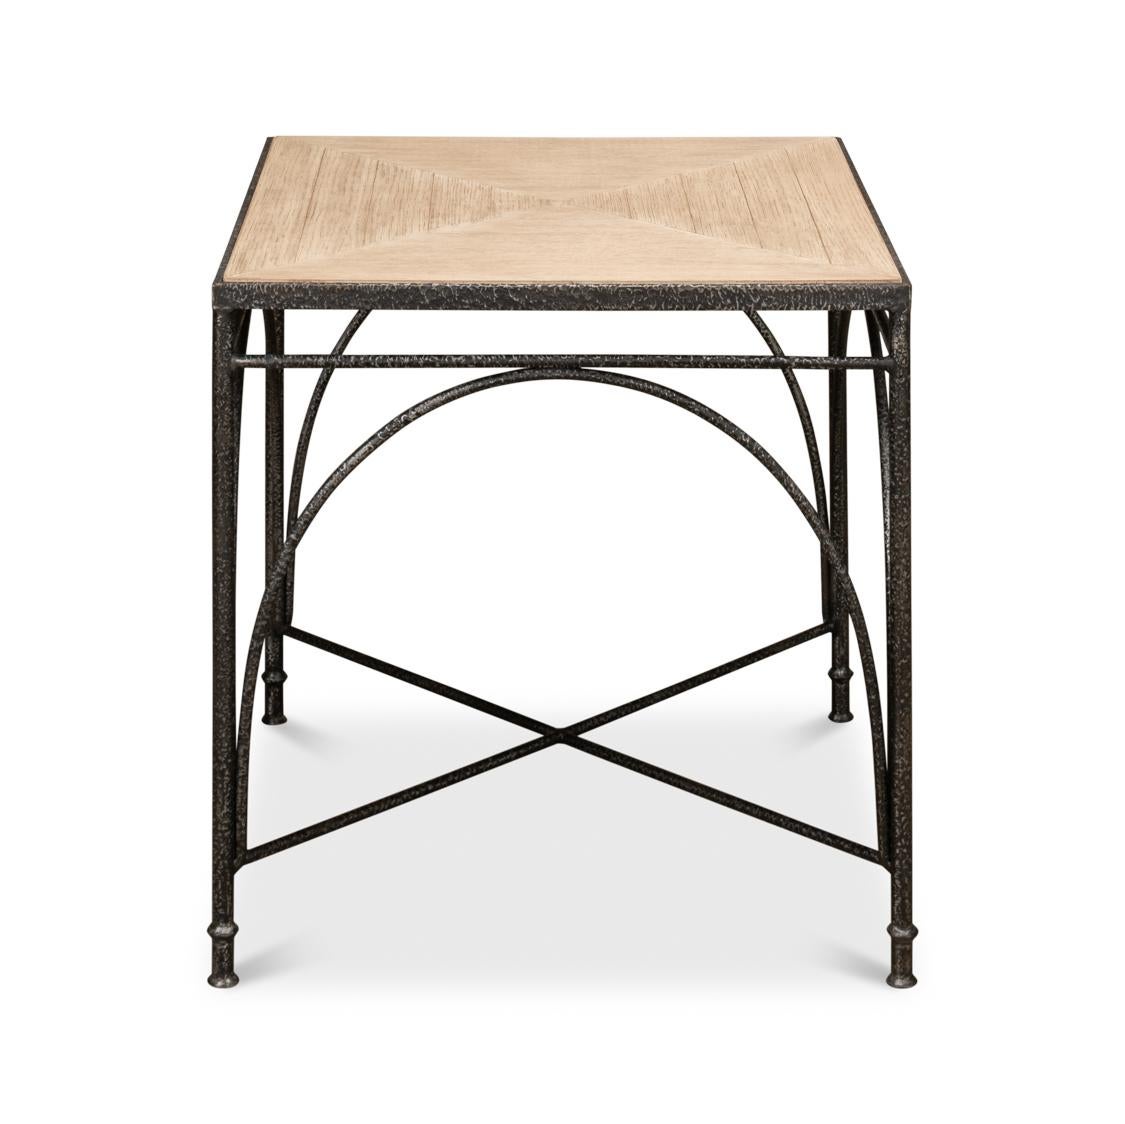 Featuring a light wood color Pine top that offers both durability and a warm, inviting look on an iron base. The robust black metal frame base gives a nod to classic craftsmanship with its intricate cross-bracing detail, promising stability and